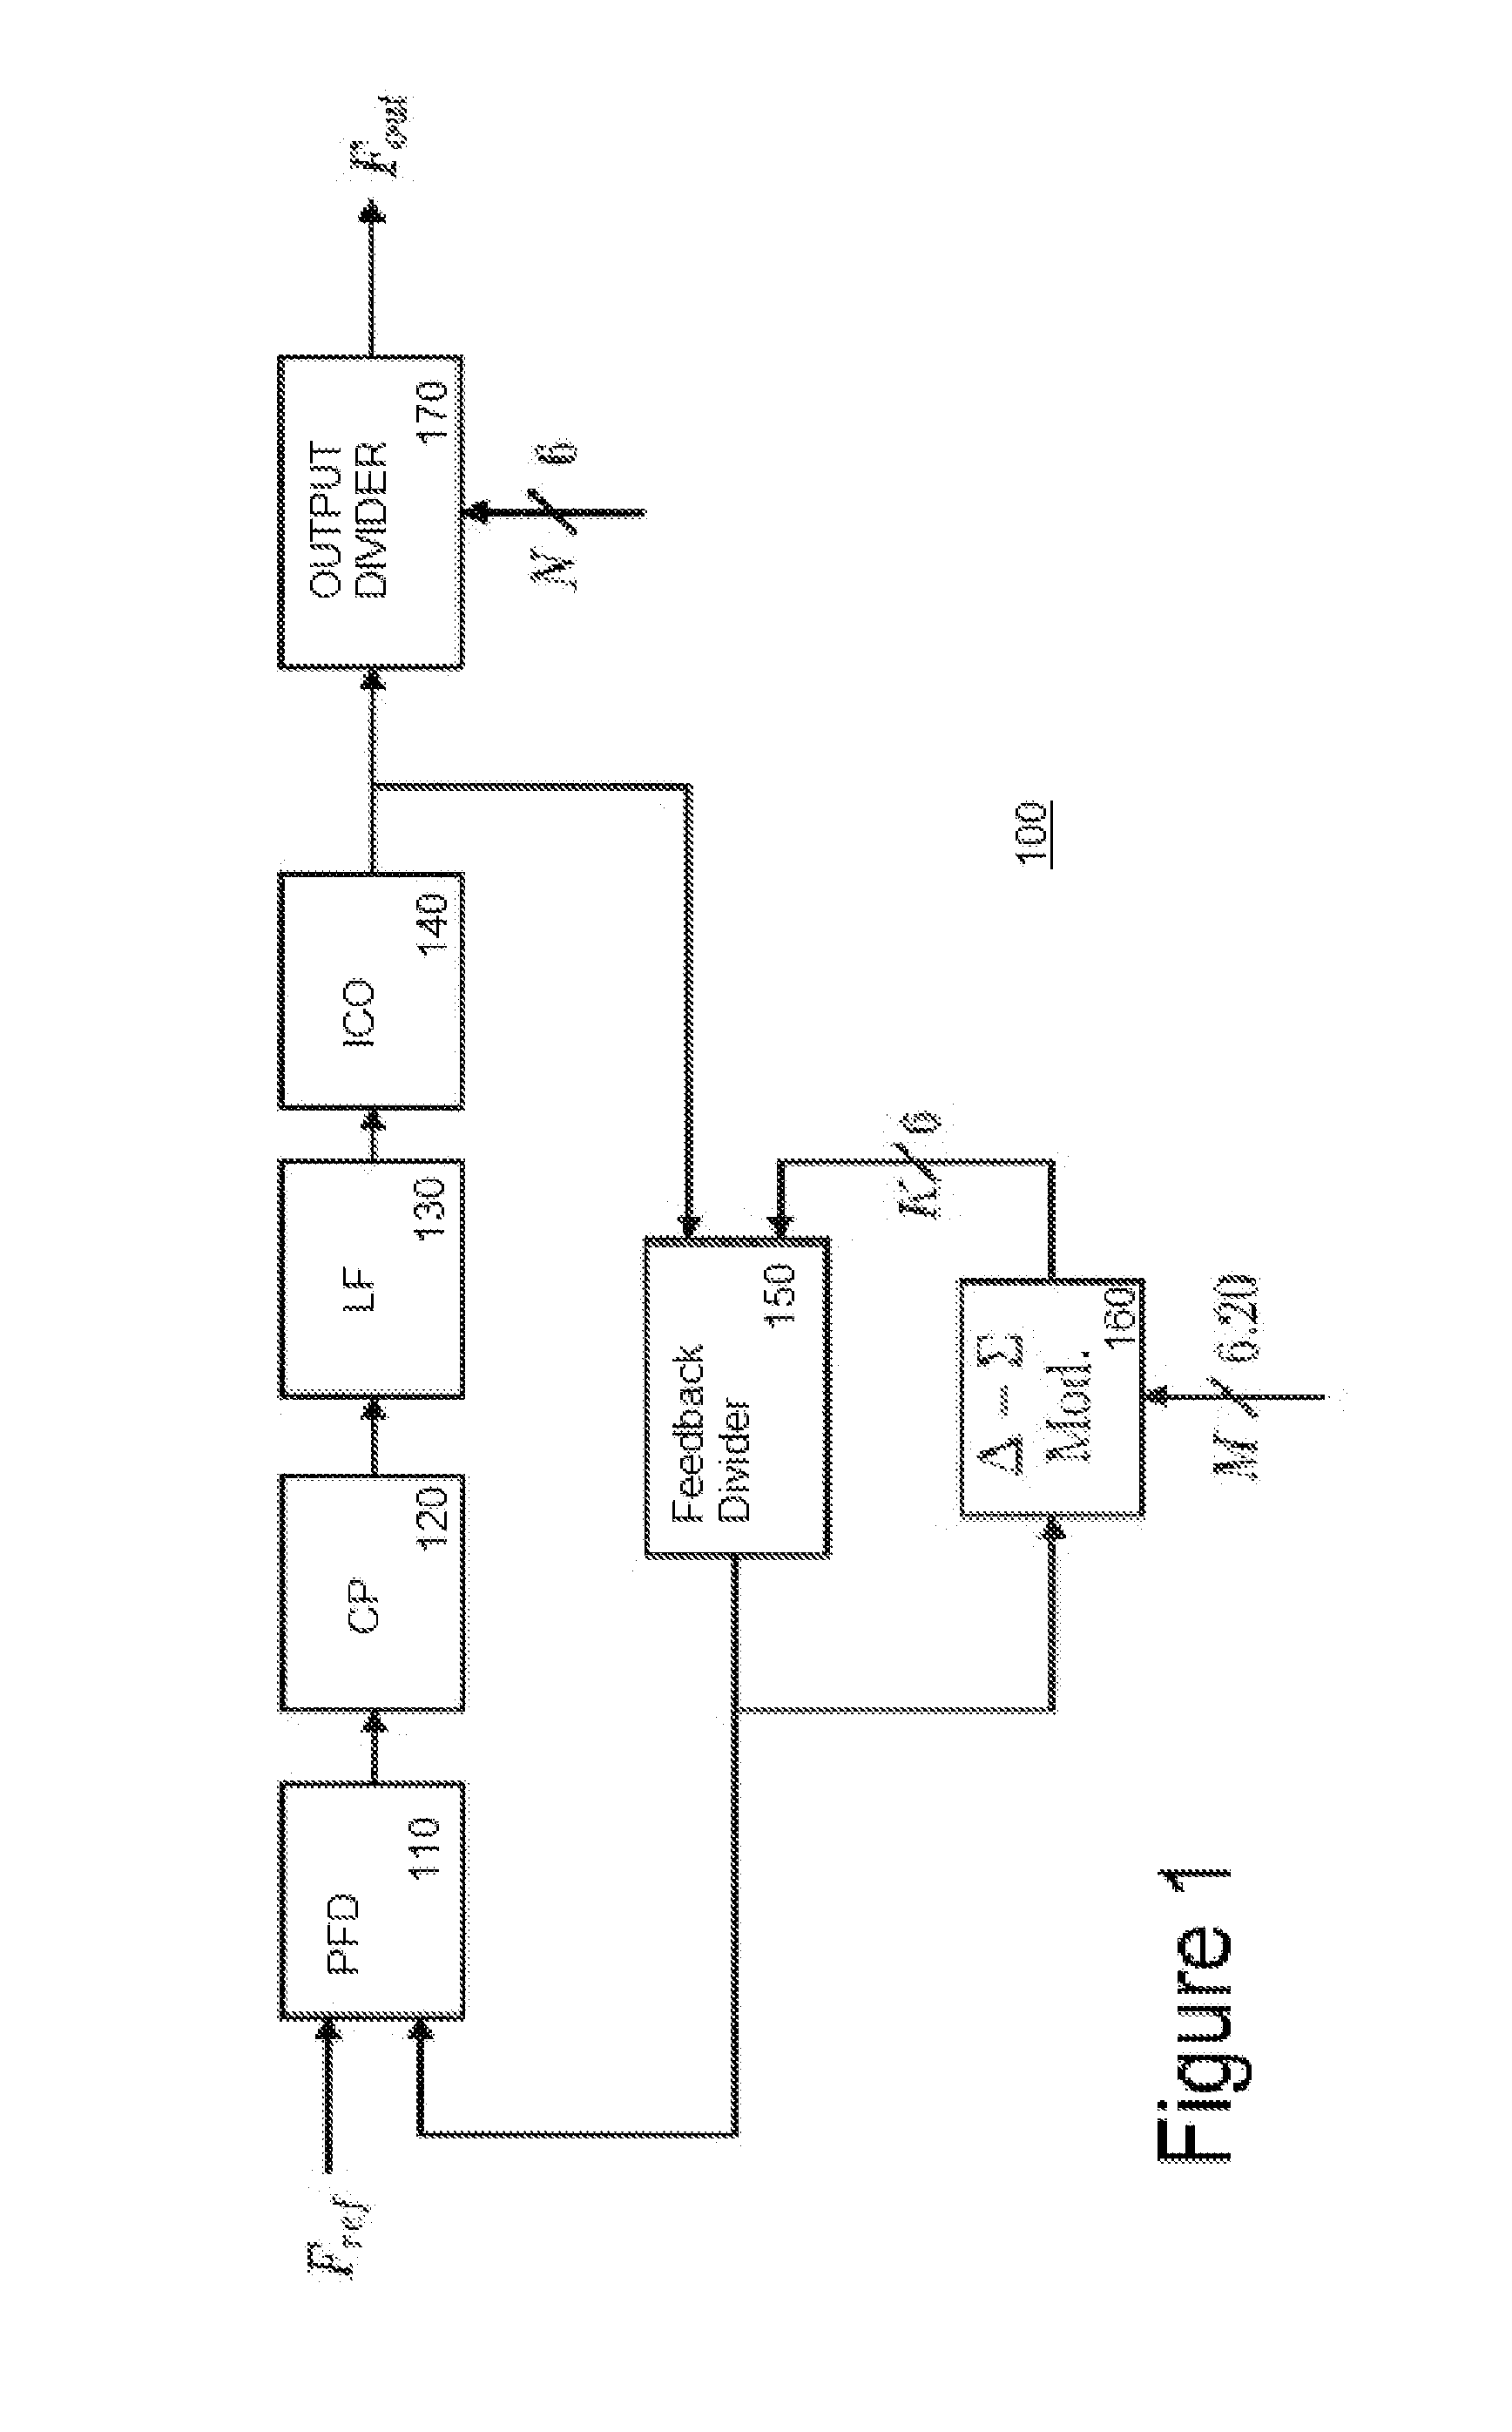 Method to increase frequency resolution of a fractional phase-locked loop